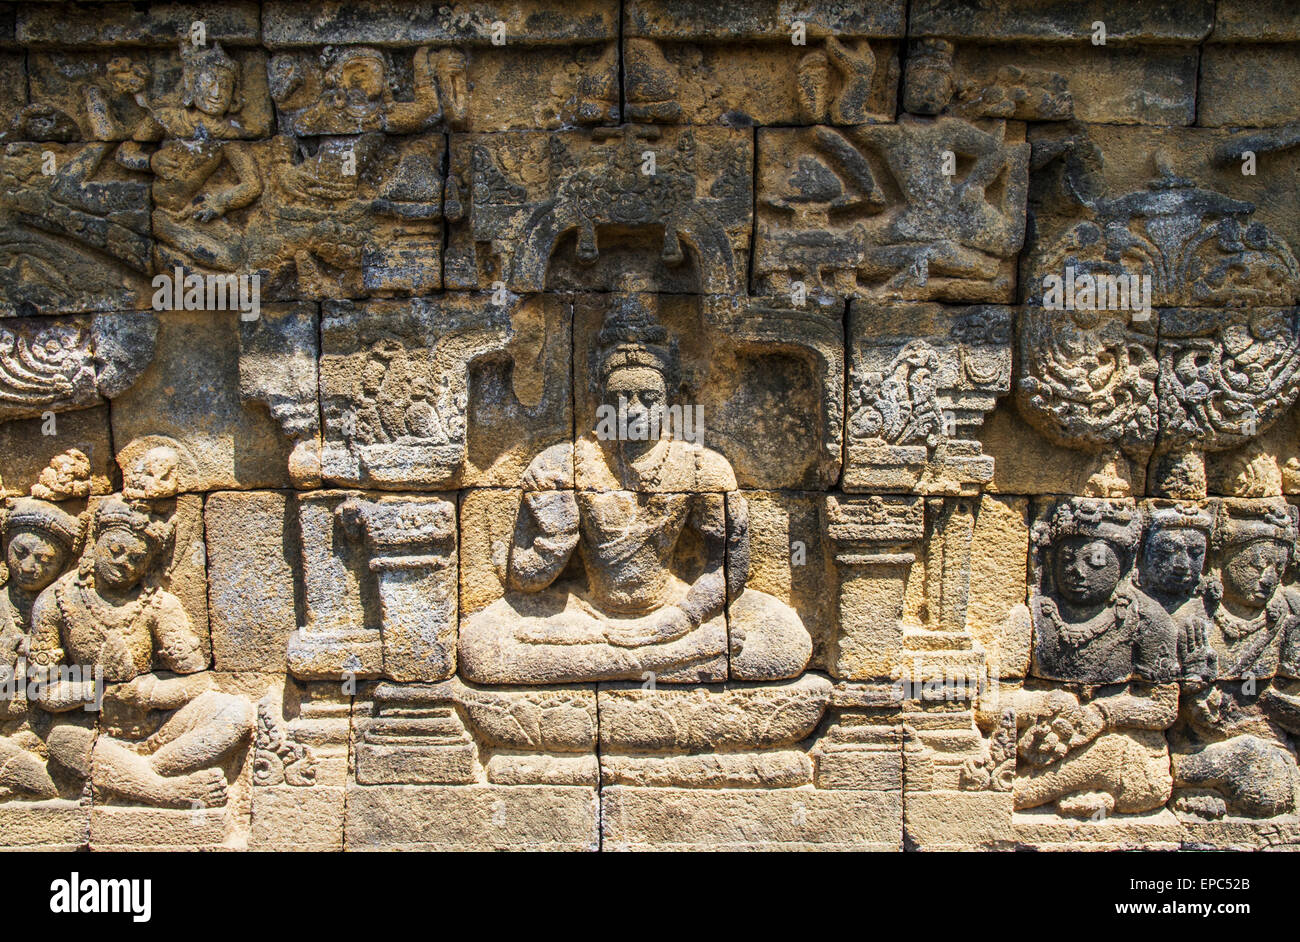 relief - stock gallery Borobudur and photography hi-res Alamy images